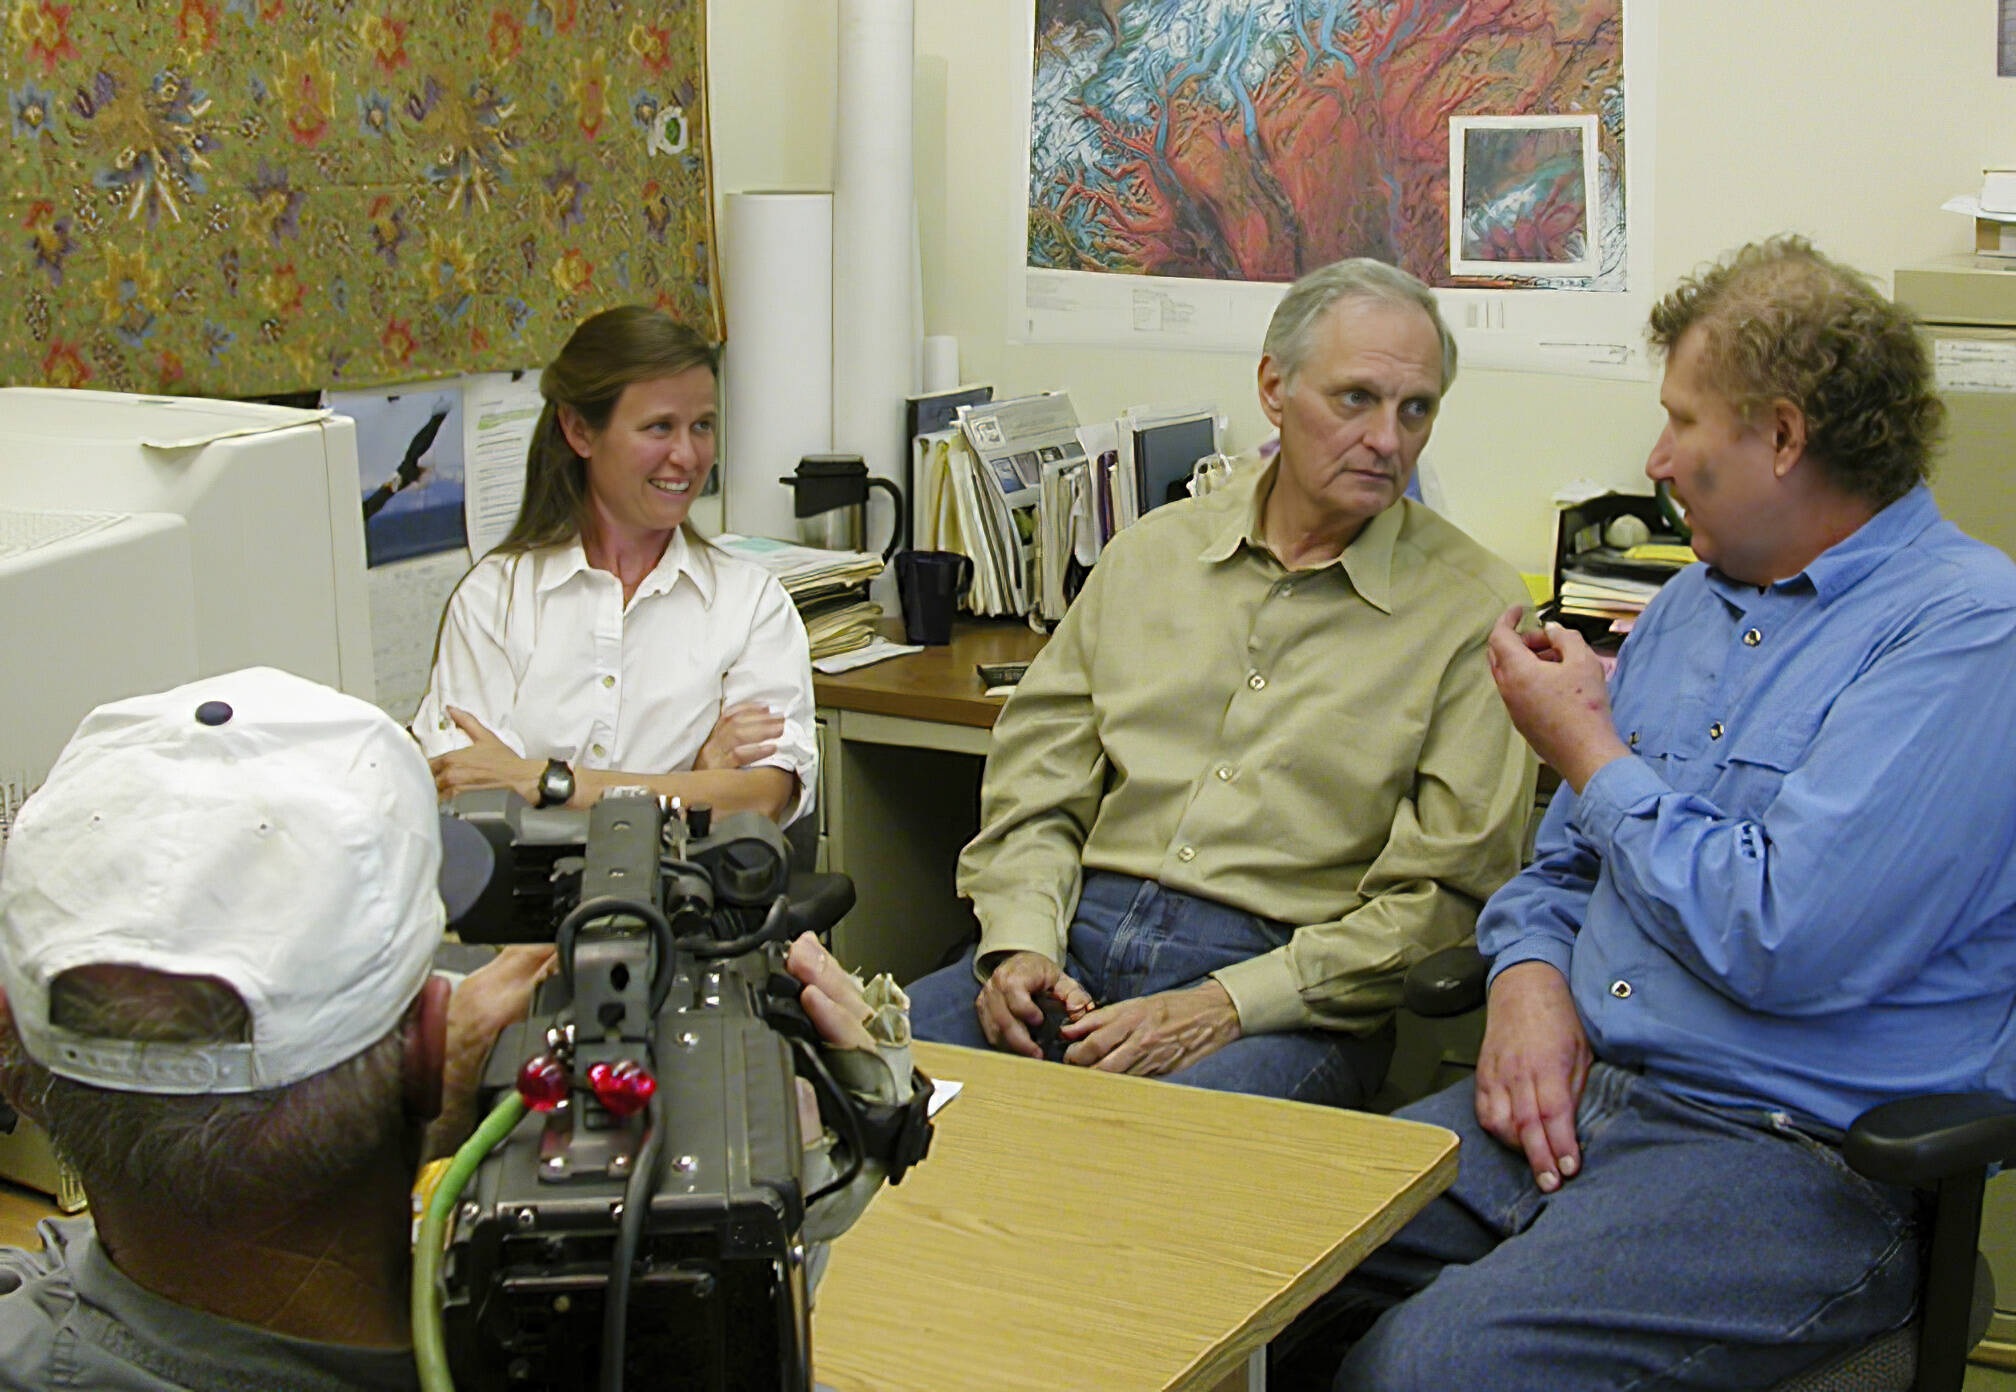 Alan Alda, center, was host of PBS’s “Scientific American Frontiers” when he visited Alaska in 2004. To his right is By Valentine, who worked in the glaciers lab at the Geophysical Institute with glaciologist Keith Echelmeyer (on Alda’s left). Echelmeyer died of brain cancer six years after Alda’s visit. (Courtesy Photo / Ned Rozell, enhanced 18 years later by JR Ancheta)